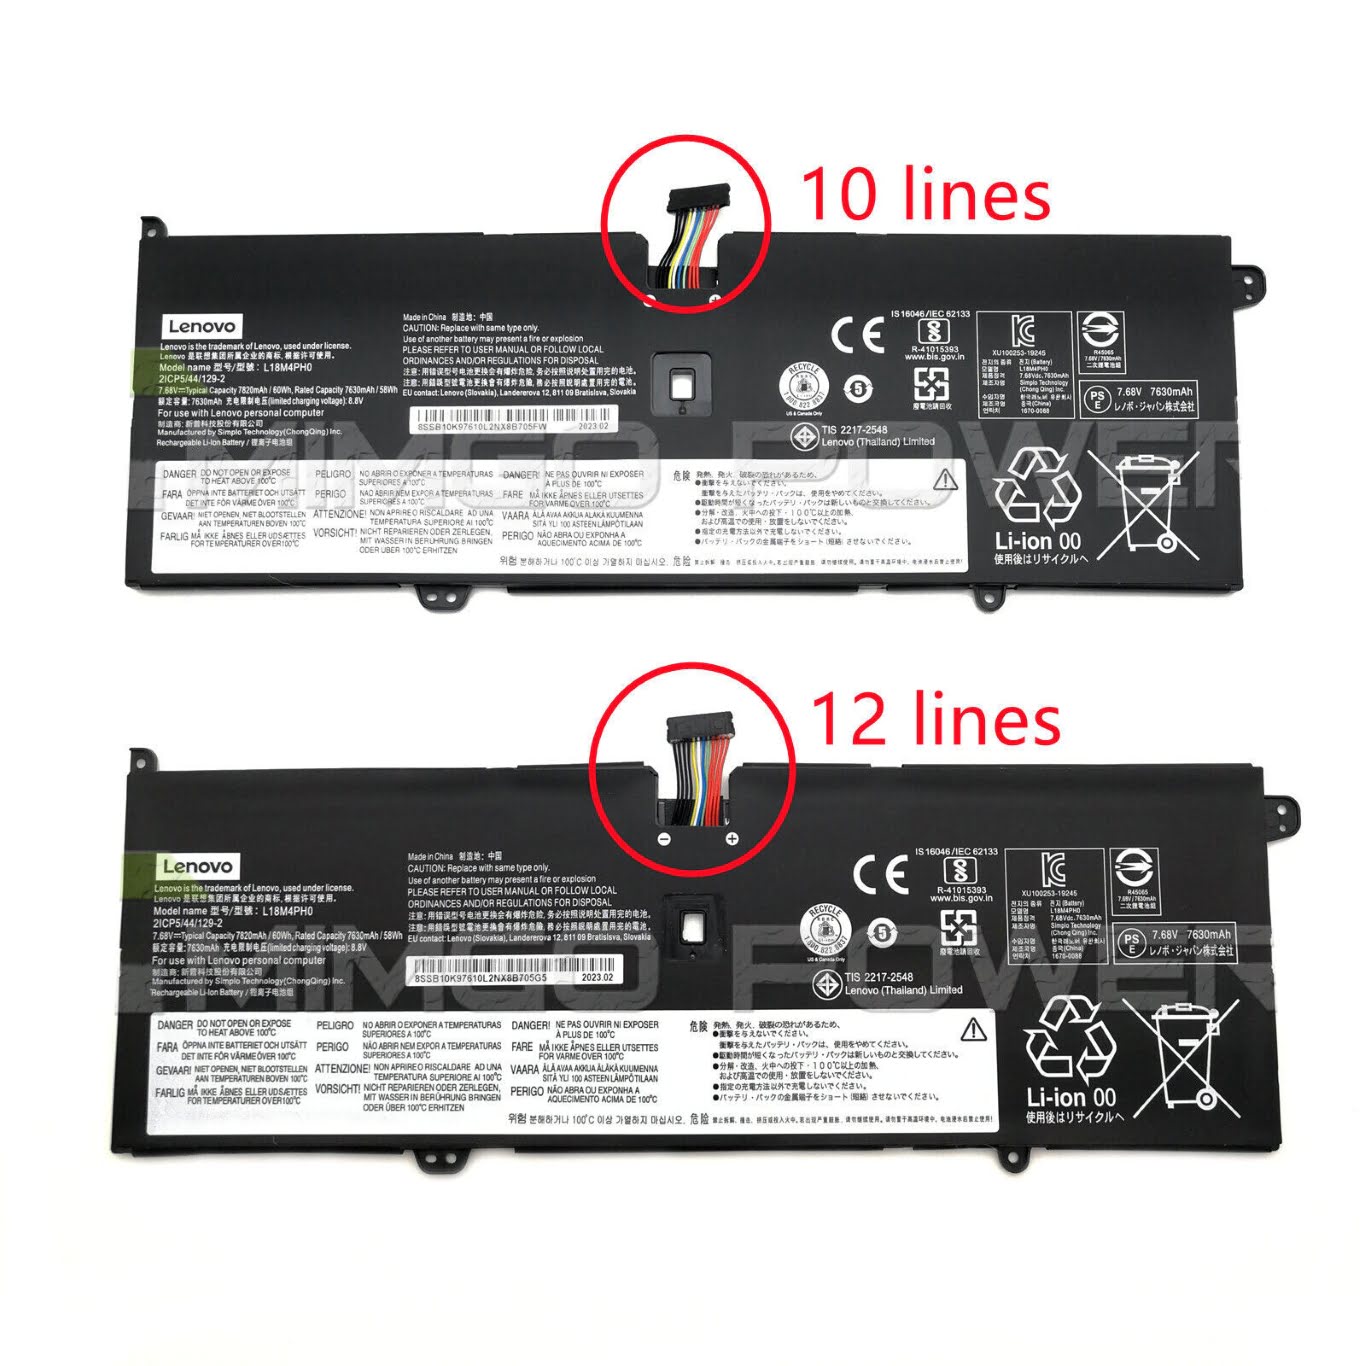 5B10T11585, 5B10T11586 replacement Laptop Battery for Lenovo YOGA C940, Yoga C940 14, 7.68v, 60wh, 4 cells